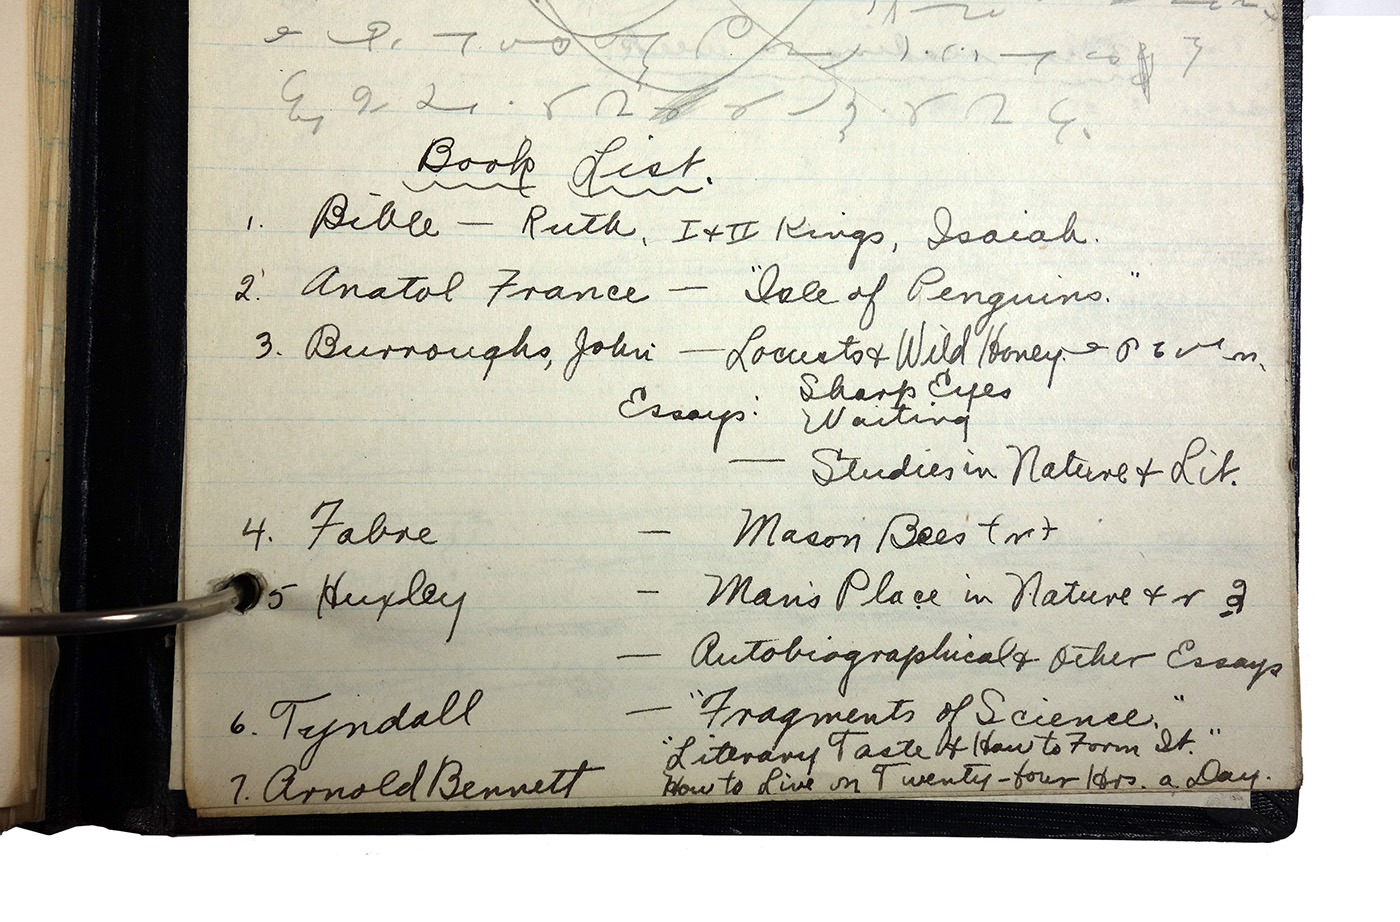 Binder with handwritten class notes, made in 1921/1922 by Charlotte Cummings while at the University of Wisconsin-Madison. Page shows reading list, which includes the Bible, Anatol France, John Burroughs, Fabre, Huxley, Tyndall and Arnold Bennett.